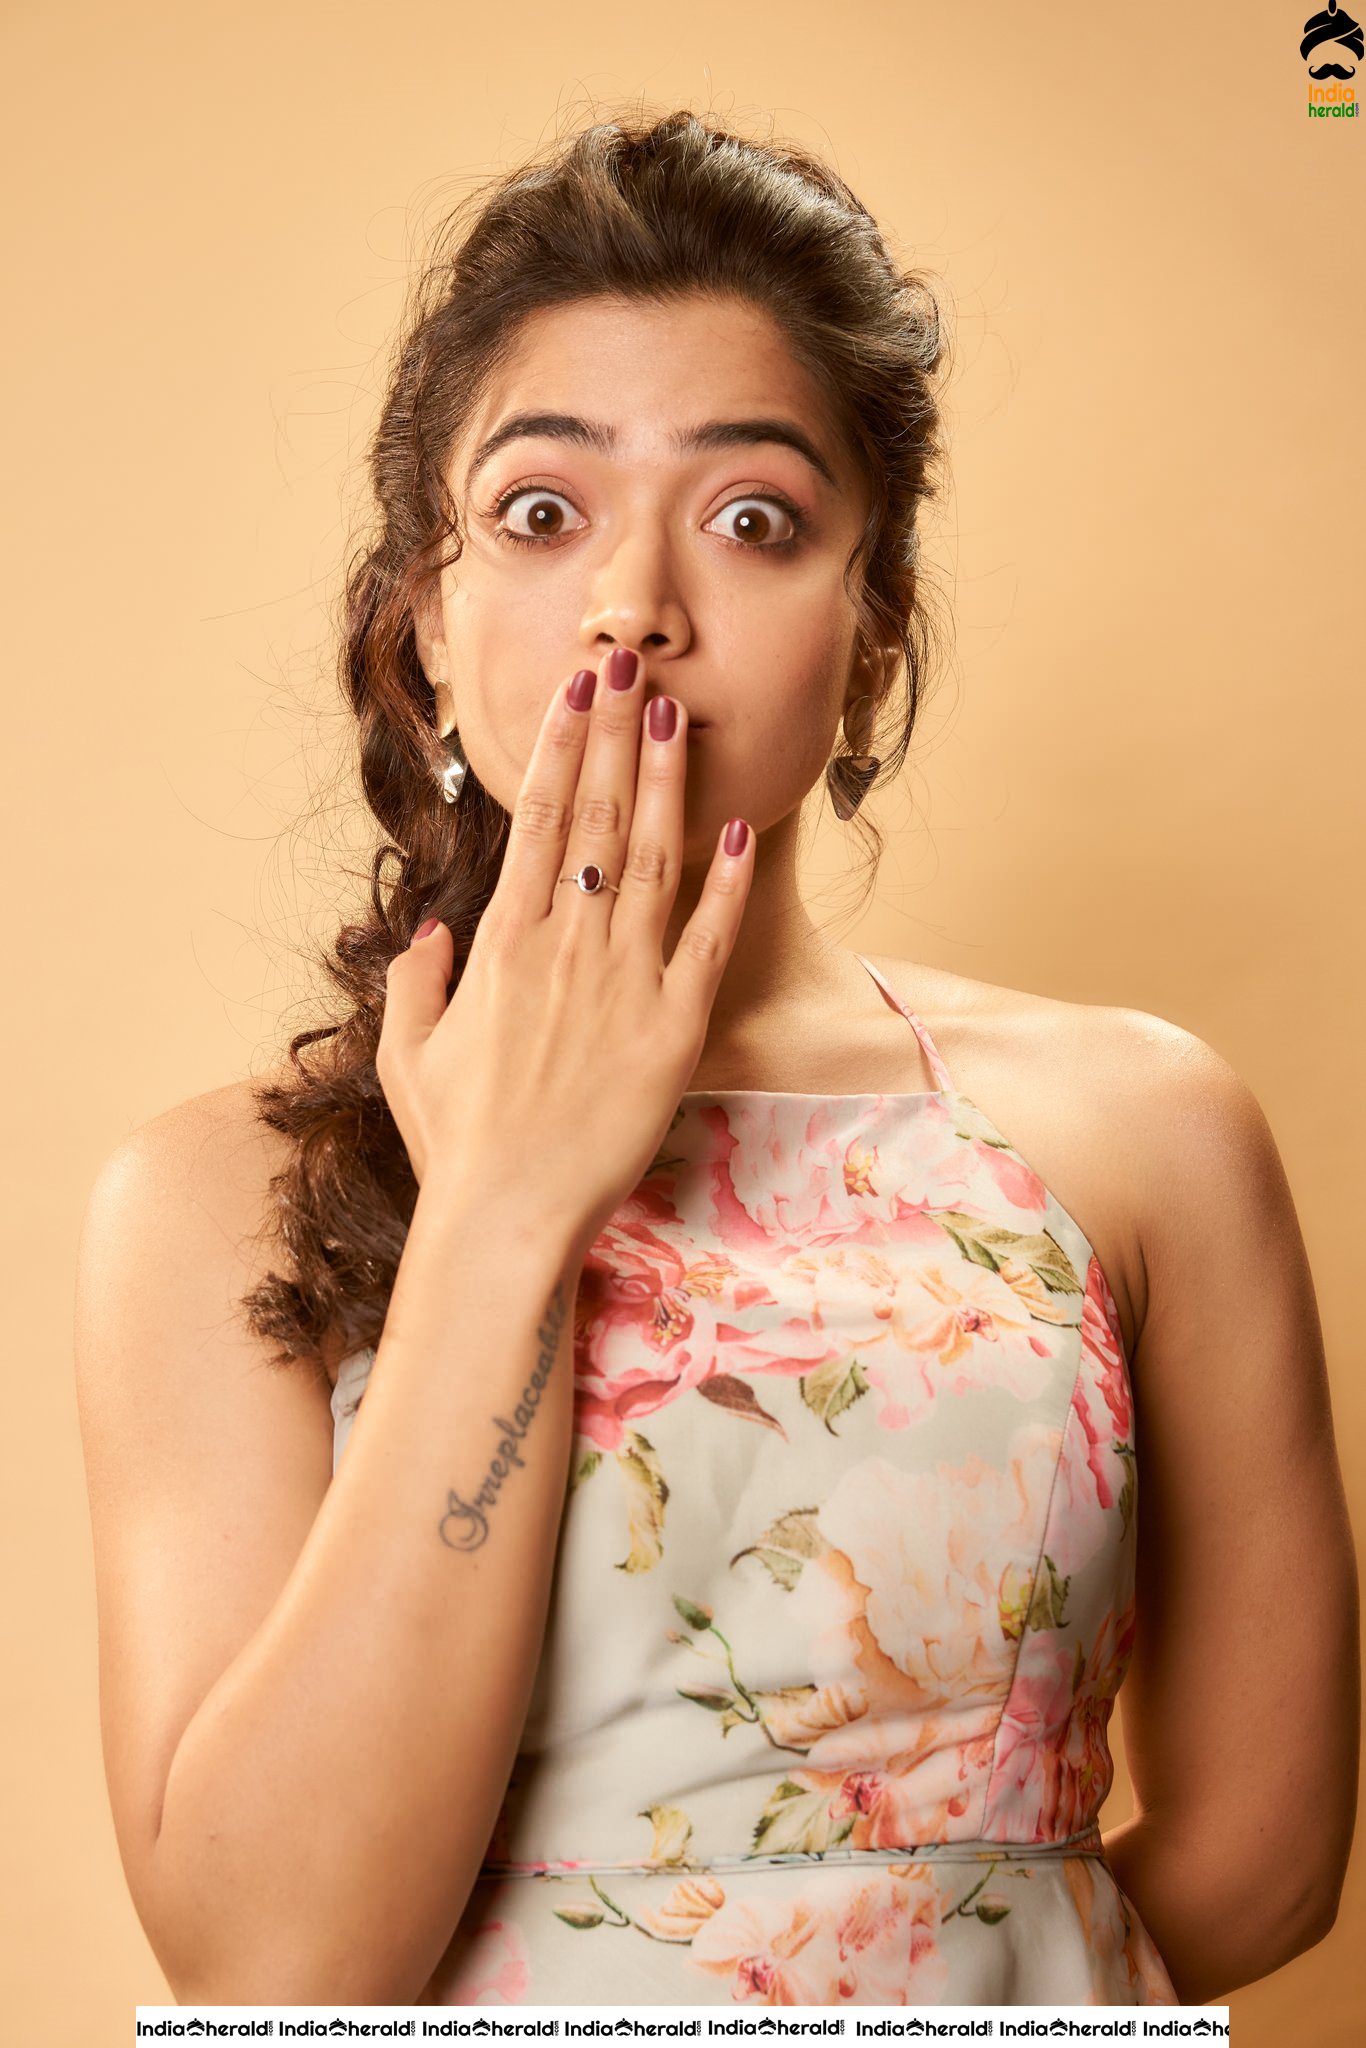 Rashmika Mandanna Cute and Adorable Expressions in this latest Photoshoot Set 2